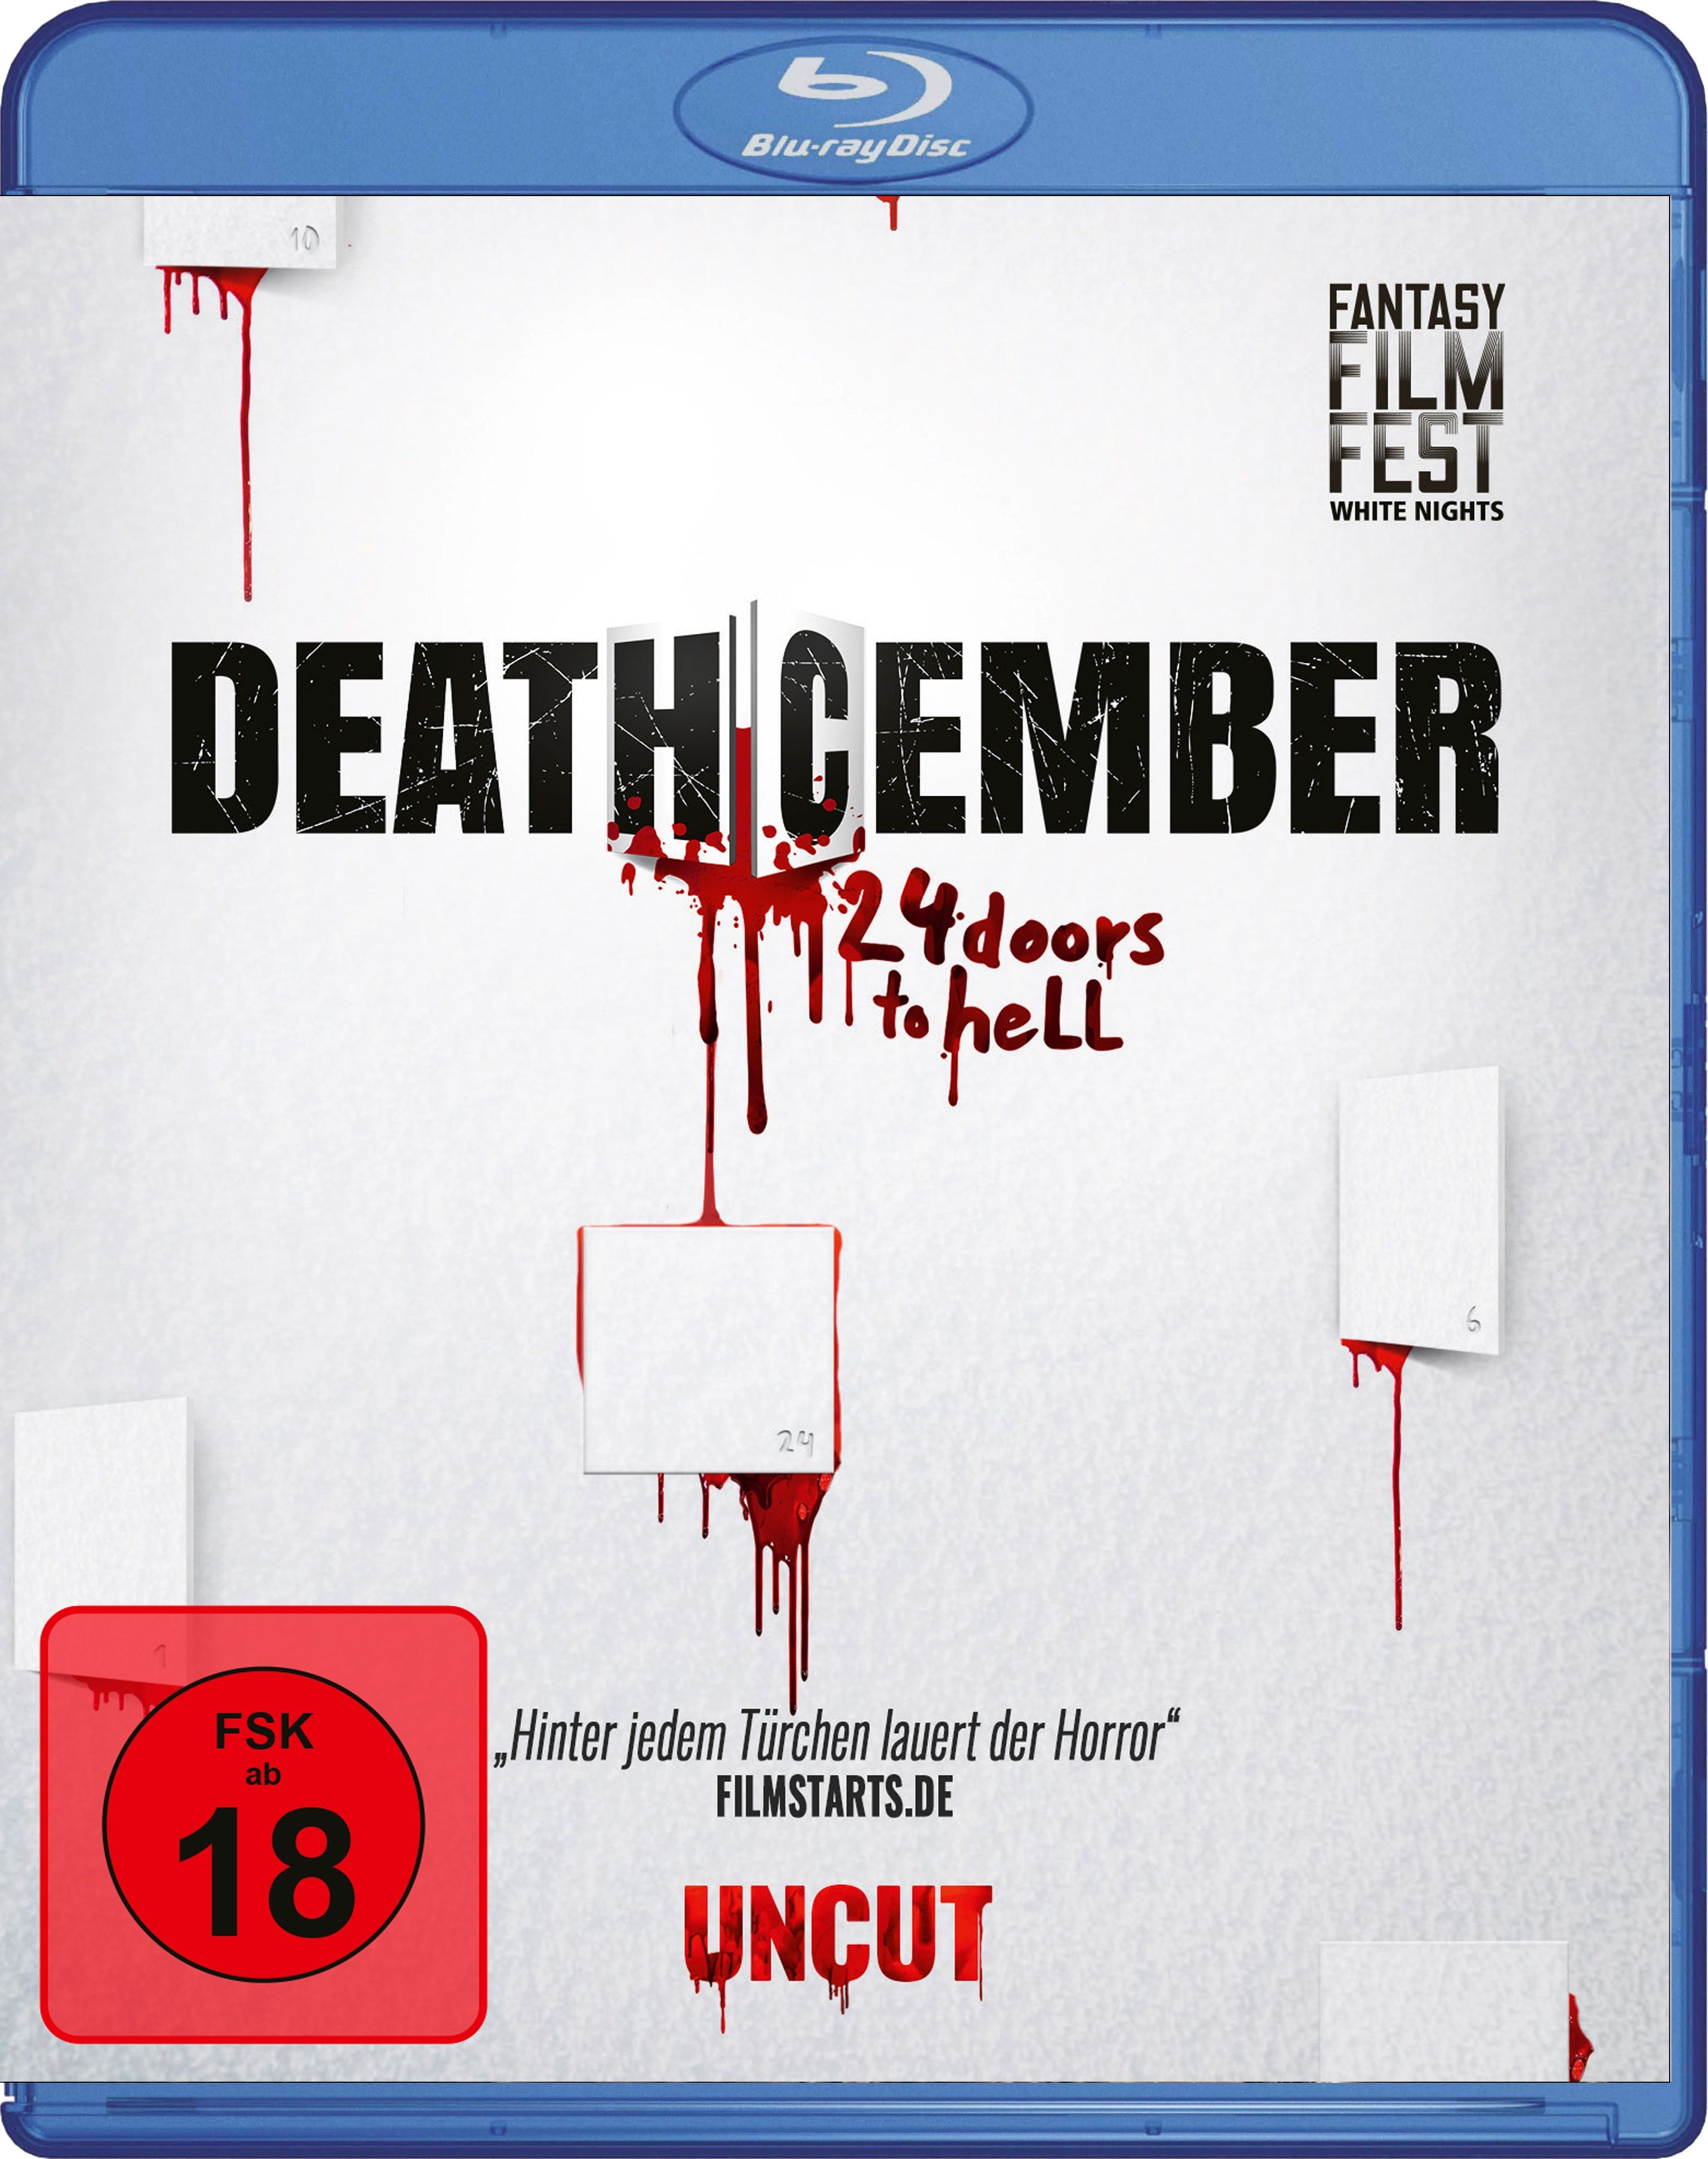 Deathcember - 24 Doors to Hell (Uncut) (BLURAY)